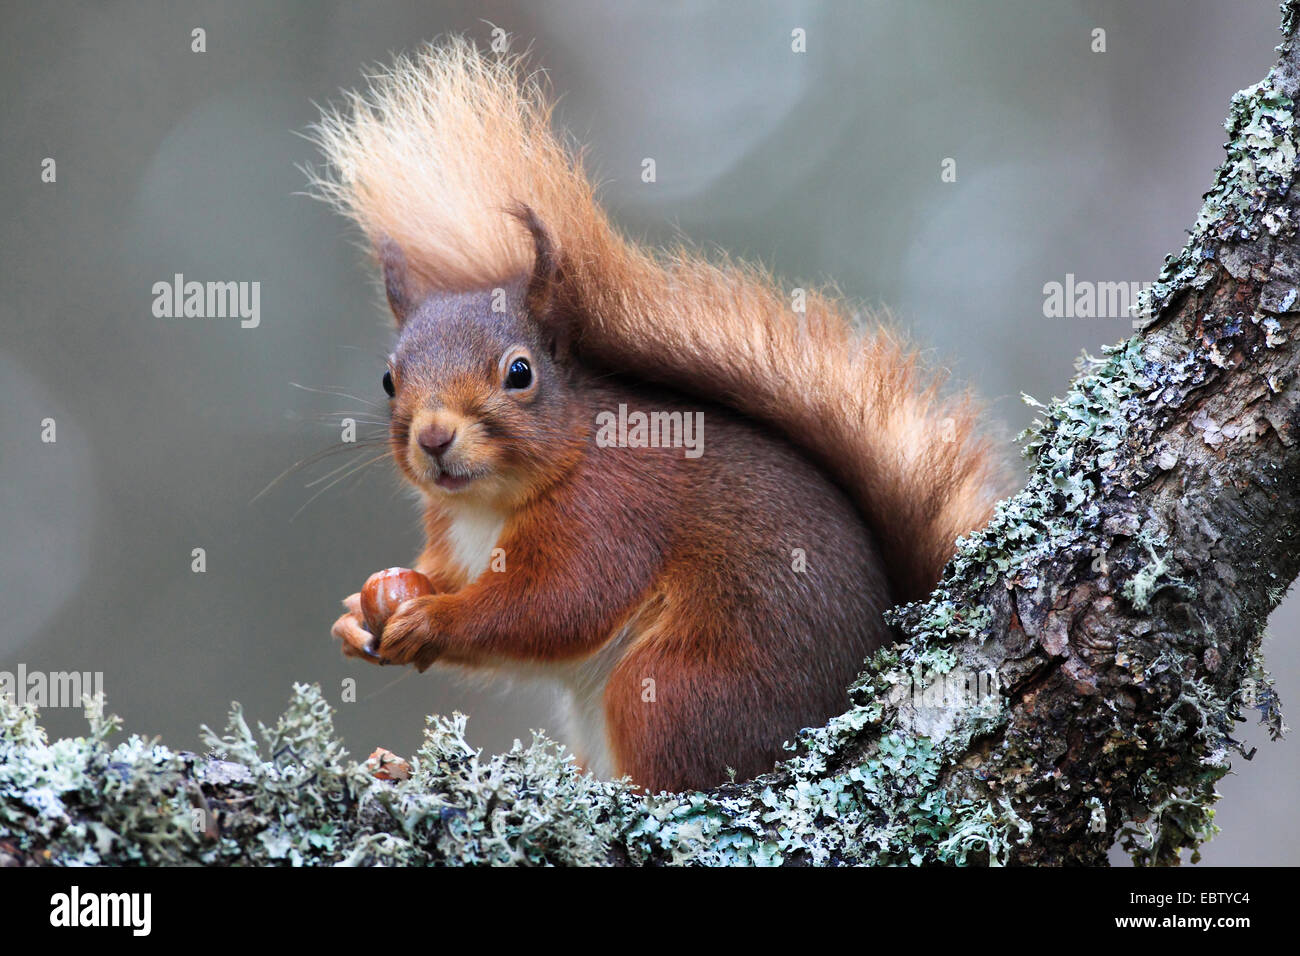 European red squirrel, Eurasian red squirrel (Sciurus vulgaris), sitting on a branch with a hazelnut in its paws, United Kingdom, Scotland, Cairngorms National Park Stock Photo